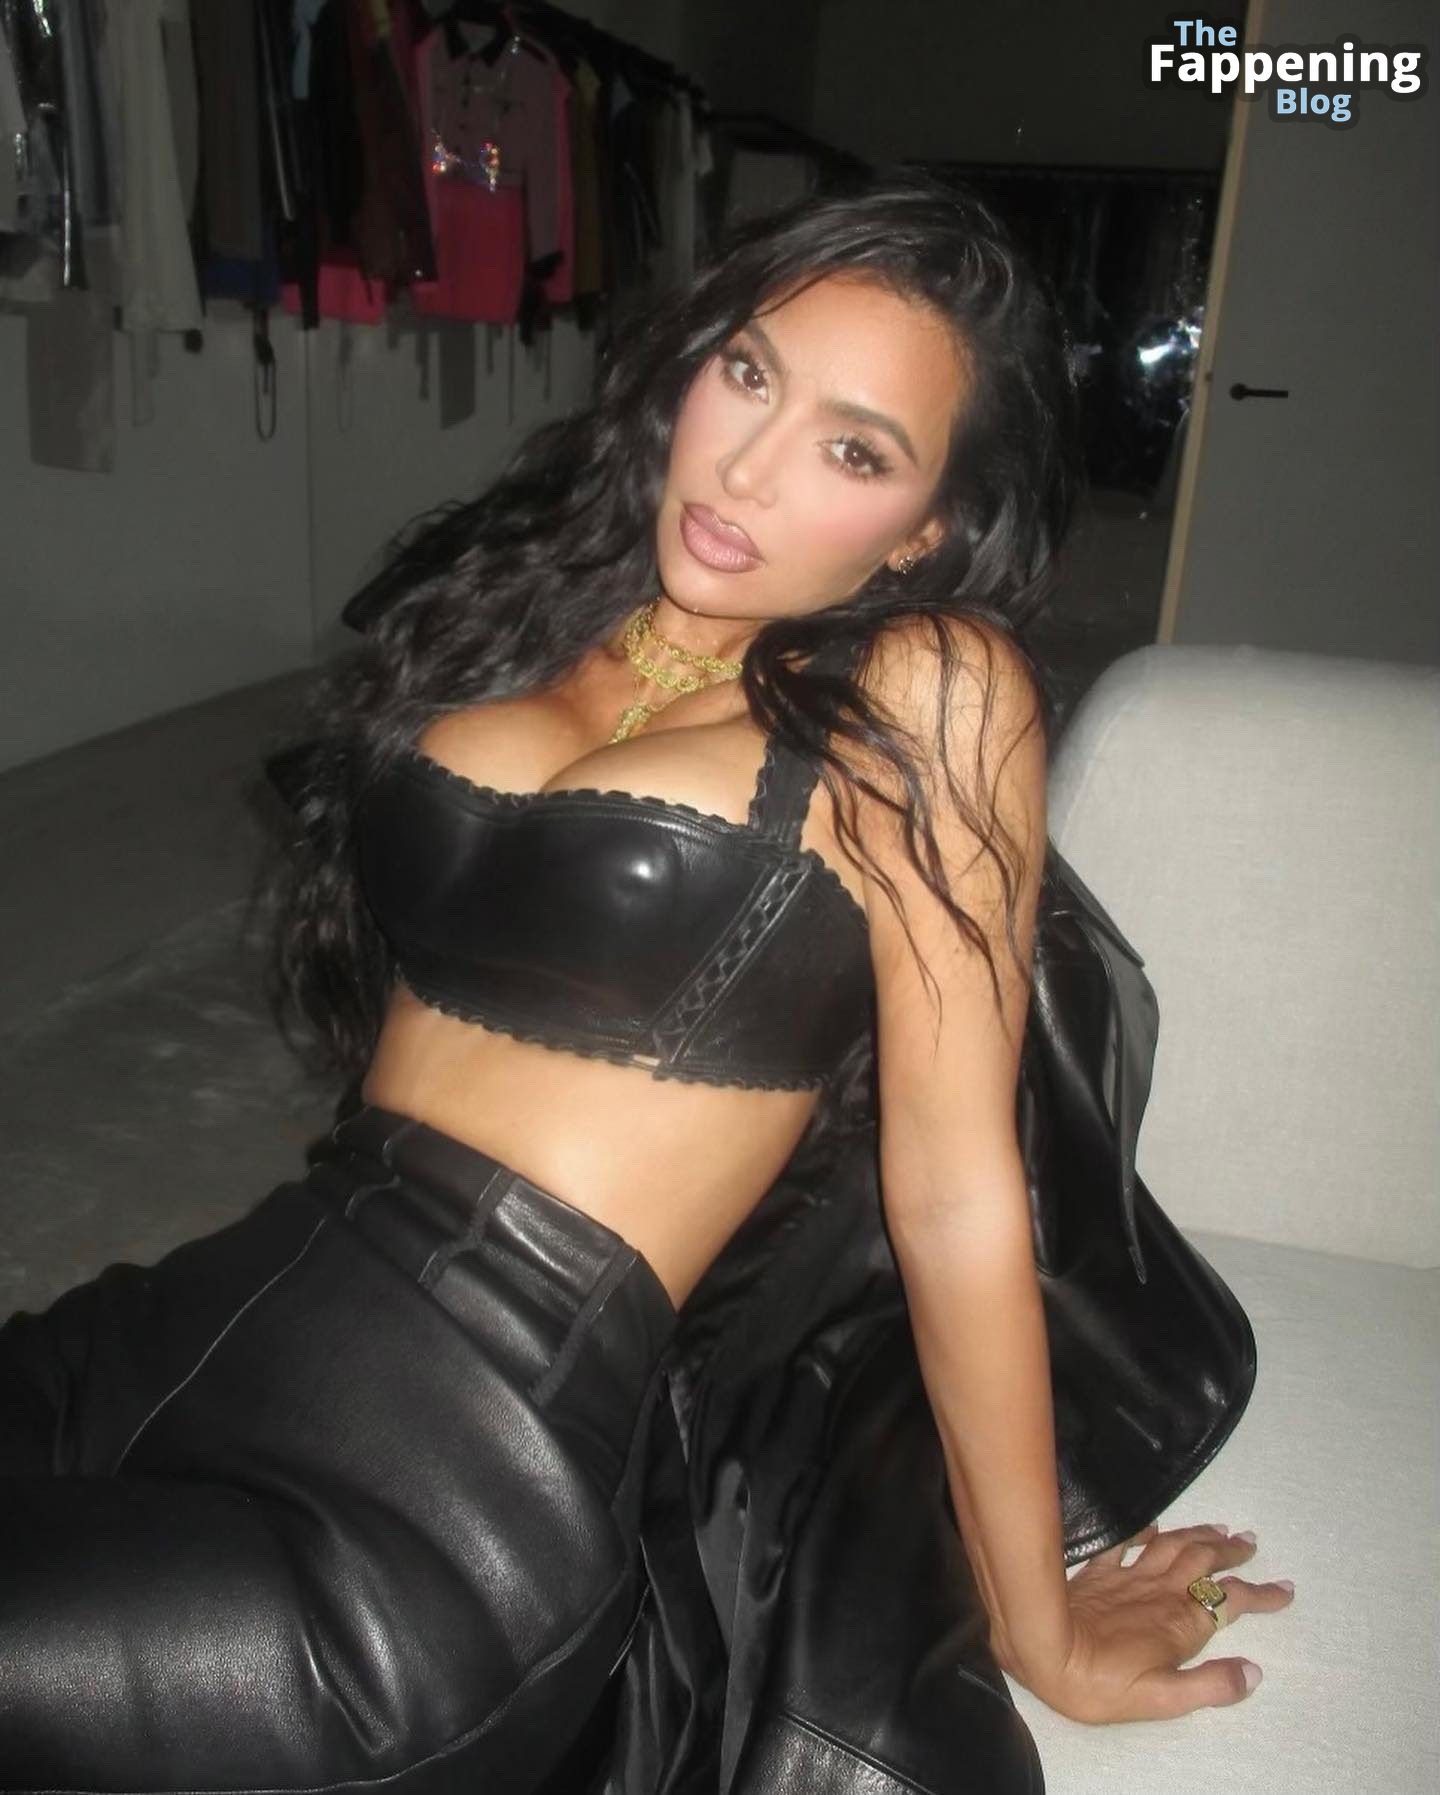 Kim Kardashian Displays Her Assets in a Leather Outfit (9 Photos)